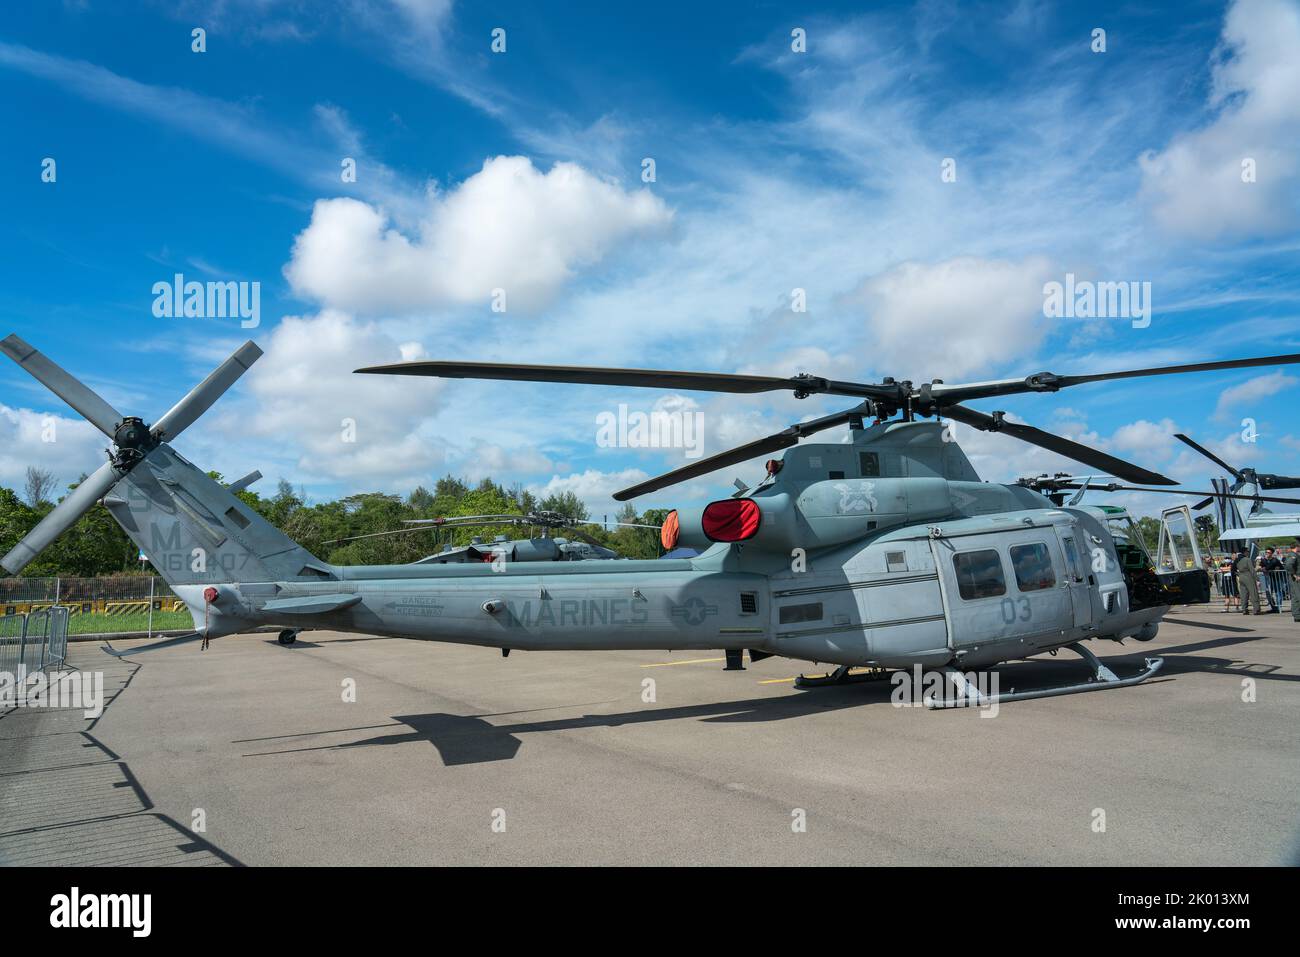 Singapore, 15 Feb, 2020: Parked Marines Helicopter used for transport  reconnaissance by USA. Stock Photo